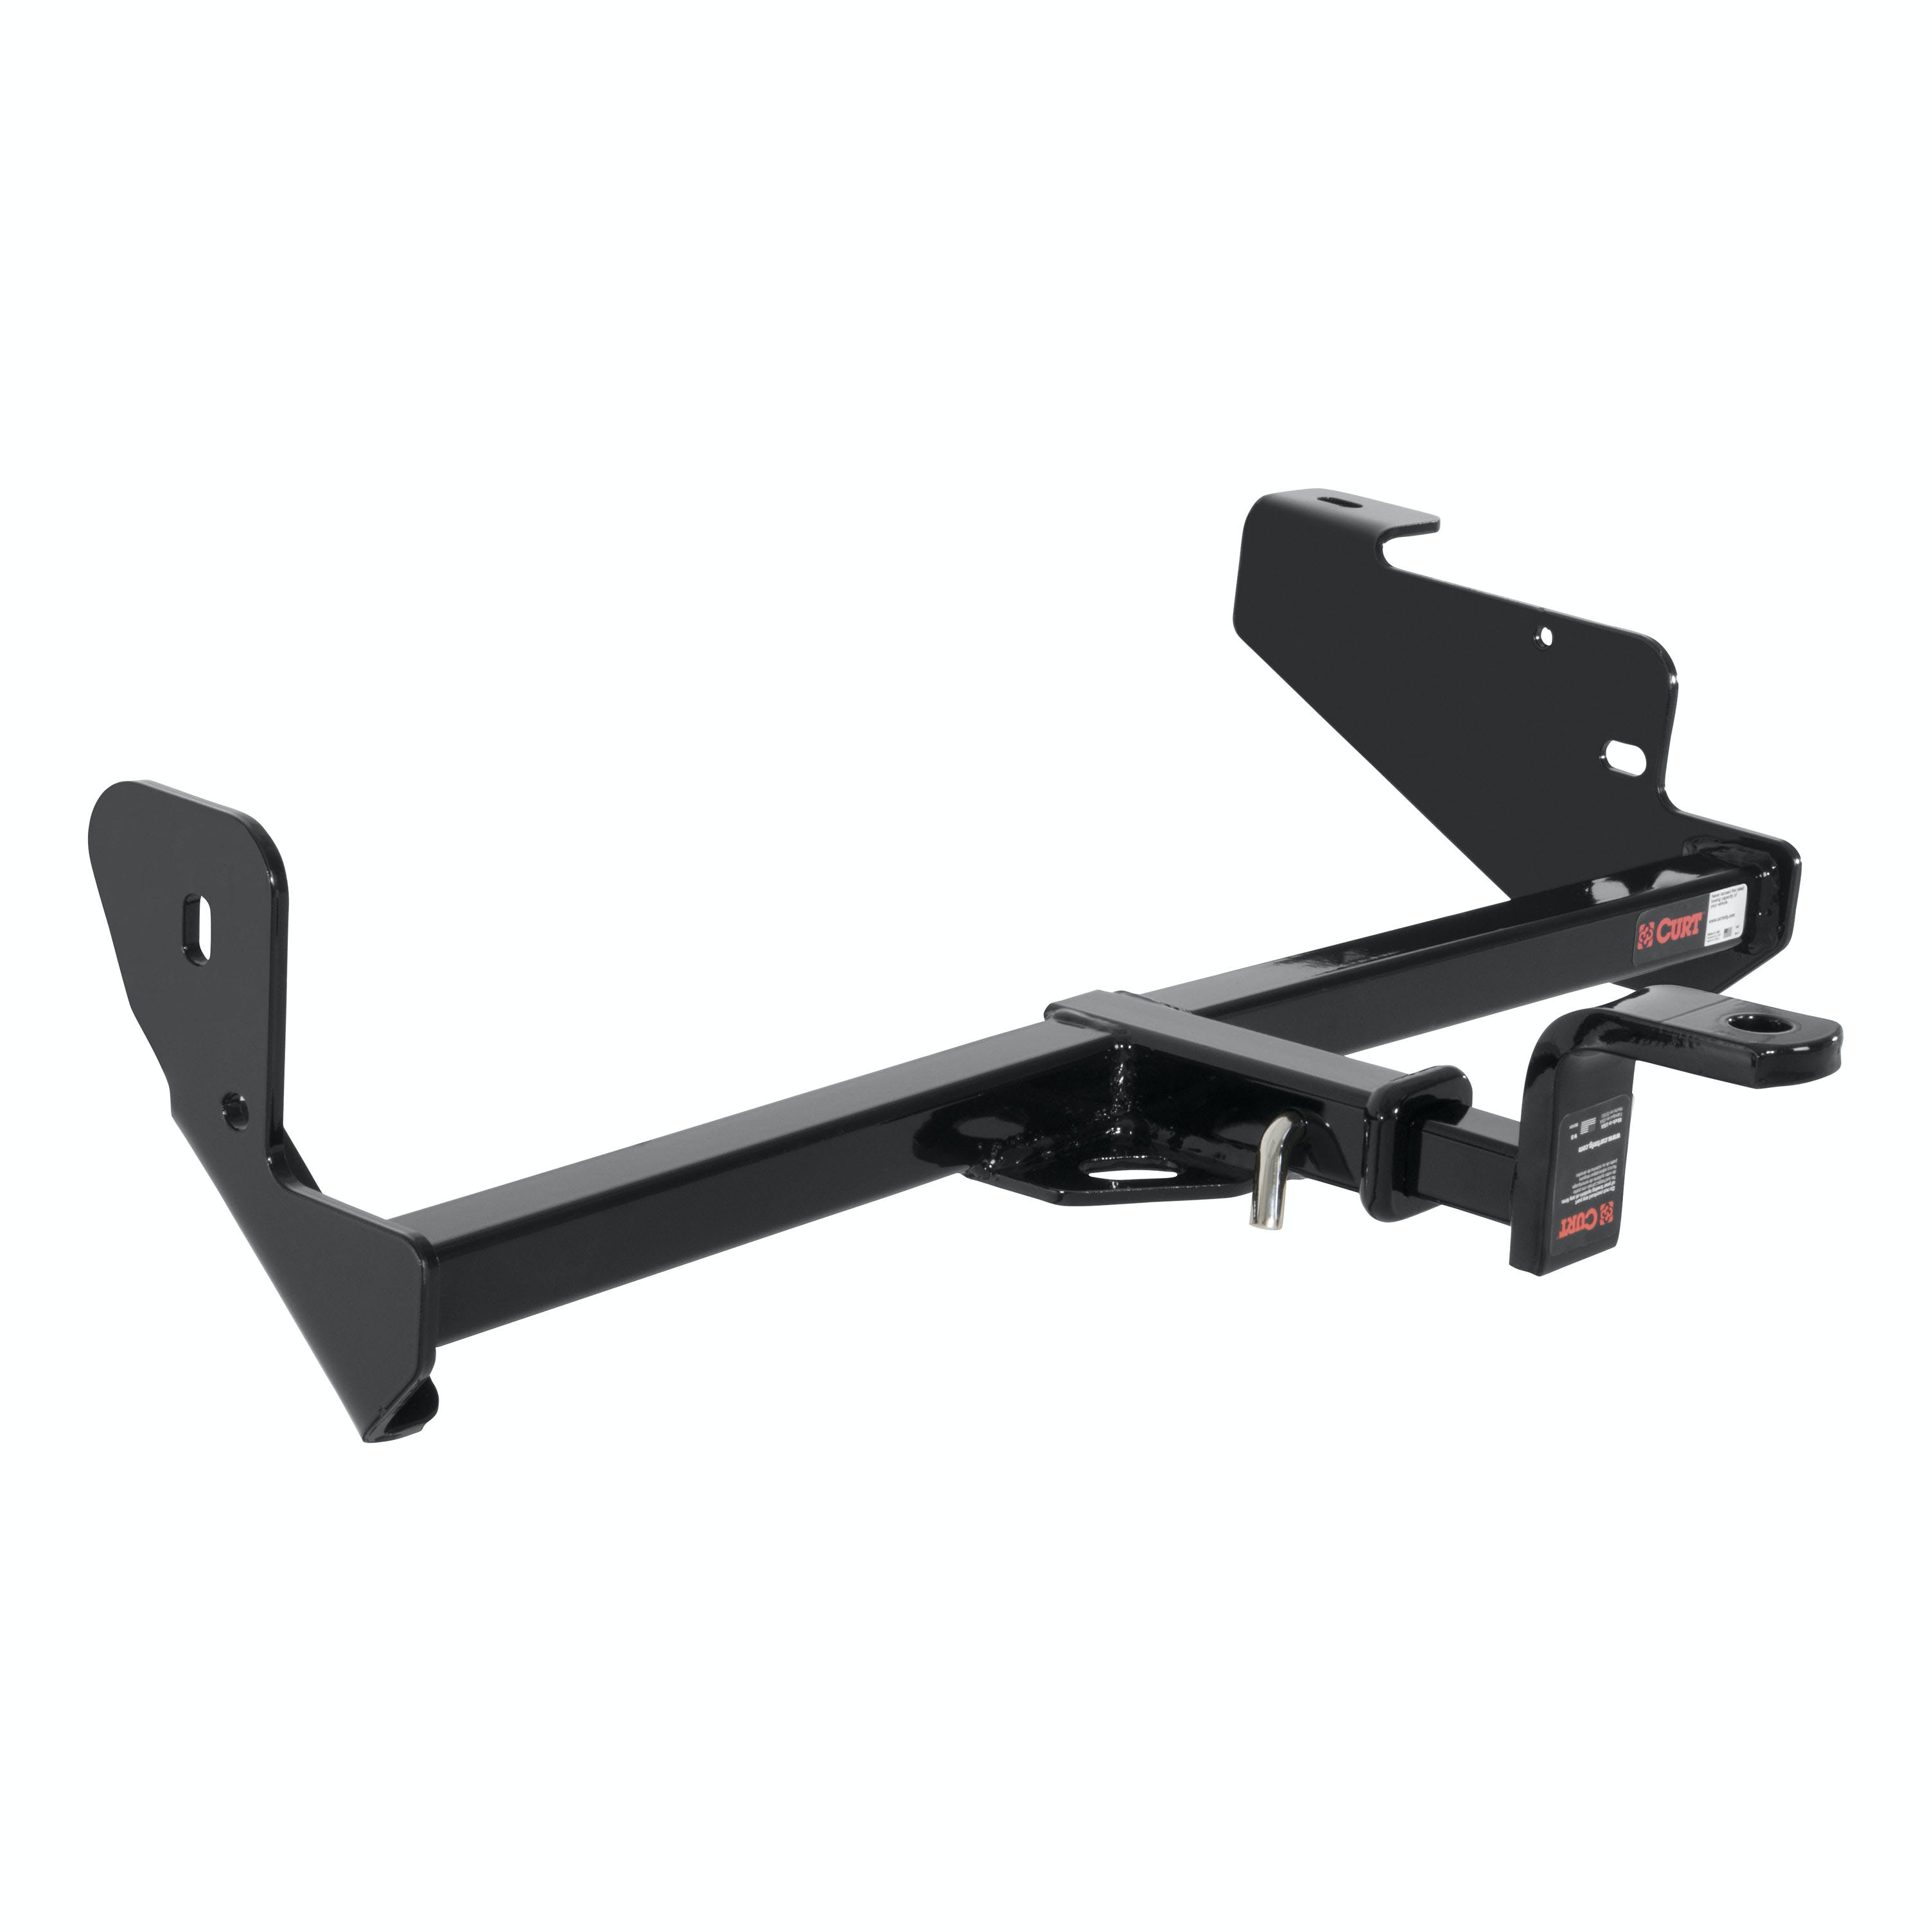 CURT 112943 Class 1 Trailer Hitch, 1-1/4 Ball Mount, Select Ford Focus